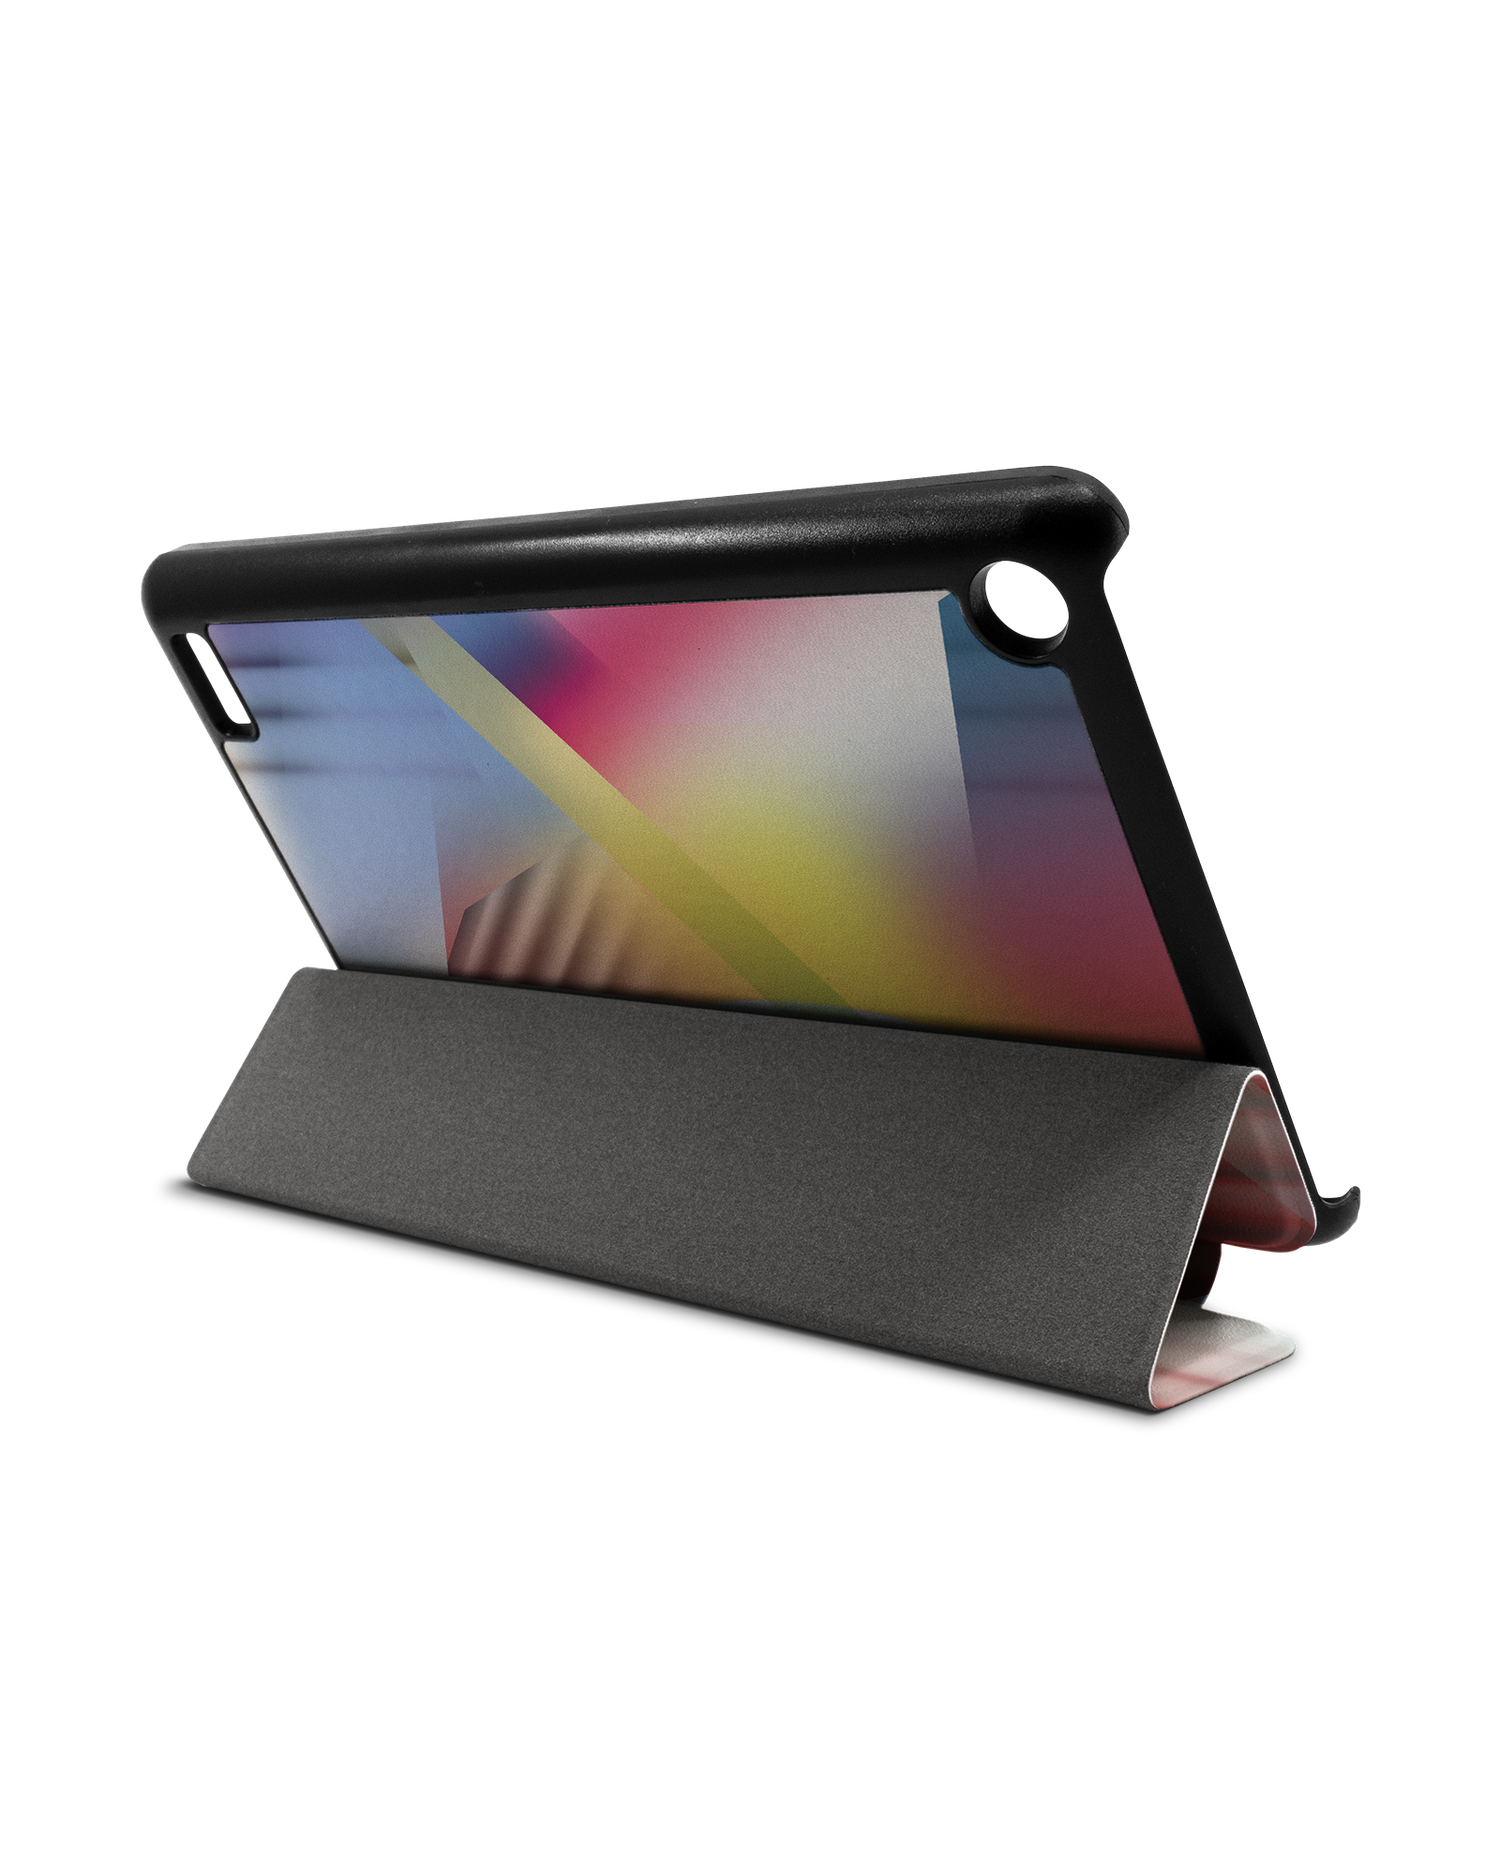 Later Eighties Tablet Smart Case for Amazon Fire 7: Used as Stand